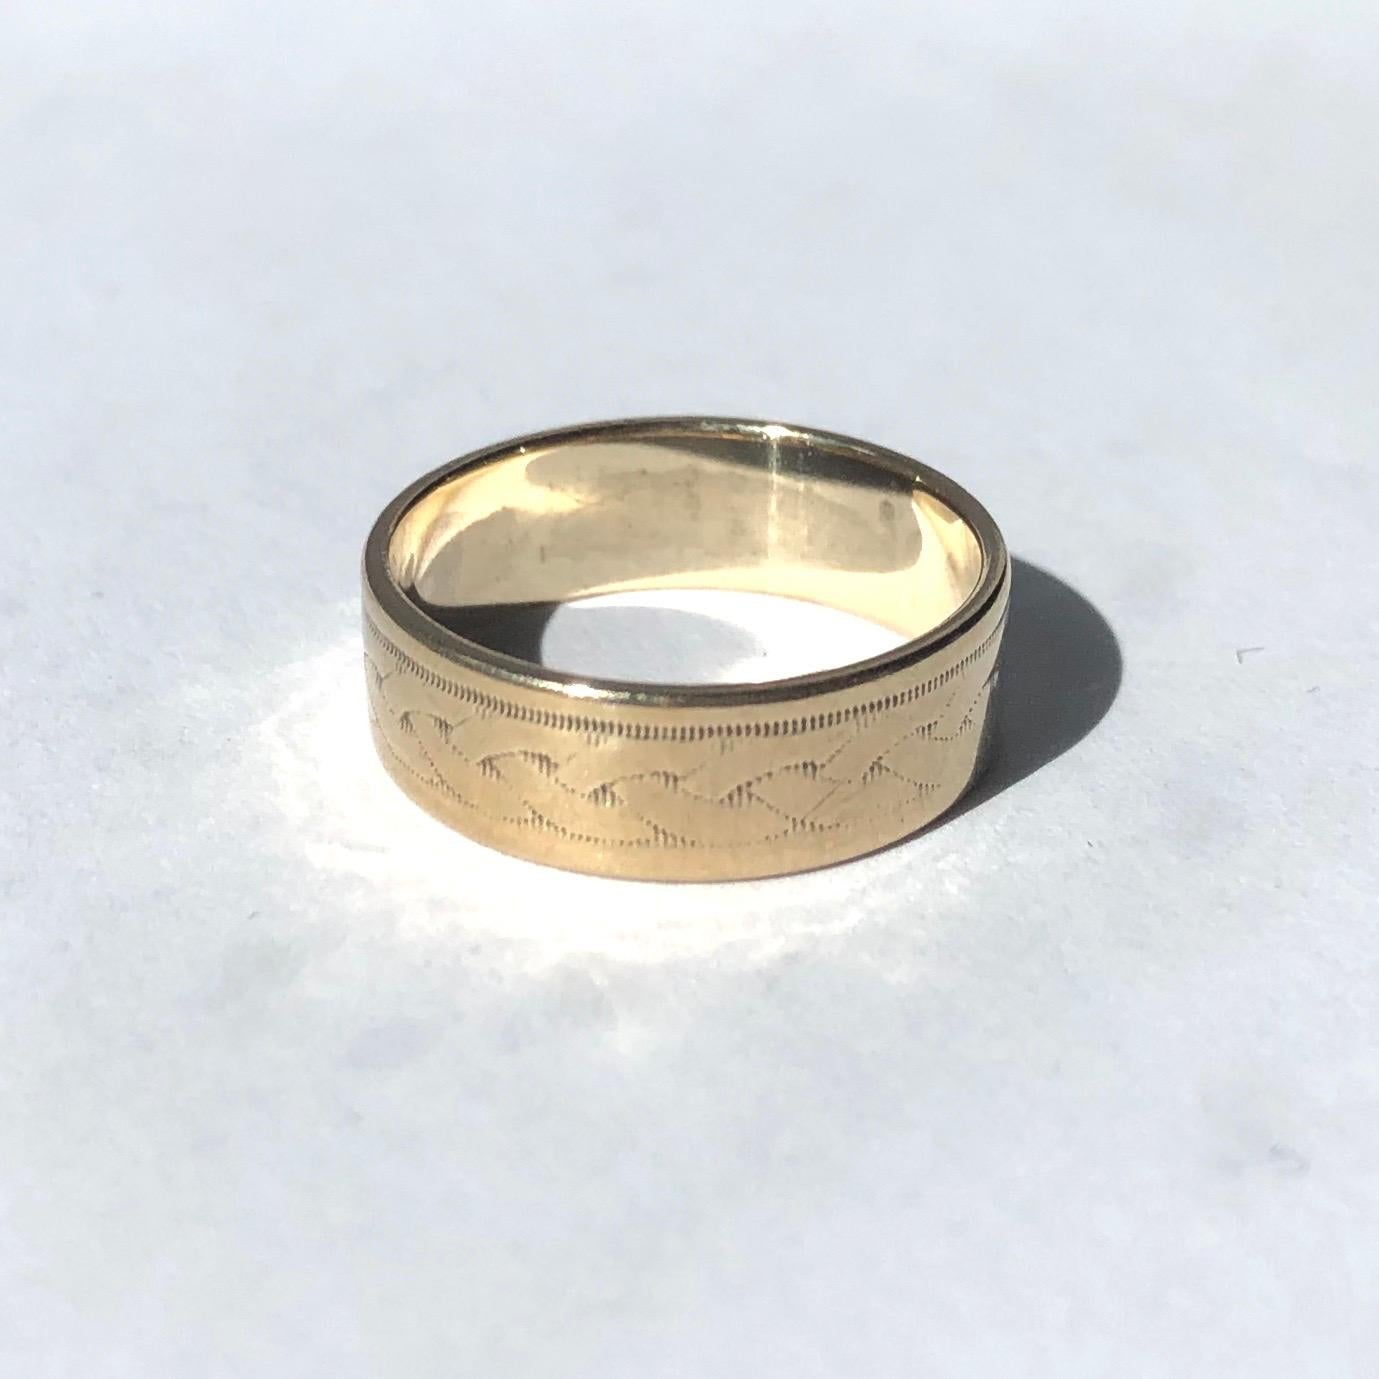 This band has engraving all the way around but it is very subtle due to the age of the piece and the wear. Modelled in 9ct gold. 

Ring Size: K or 5 1/4 
Band Width: 5.5mm

Weight: 2.6g